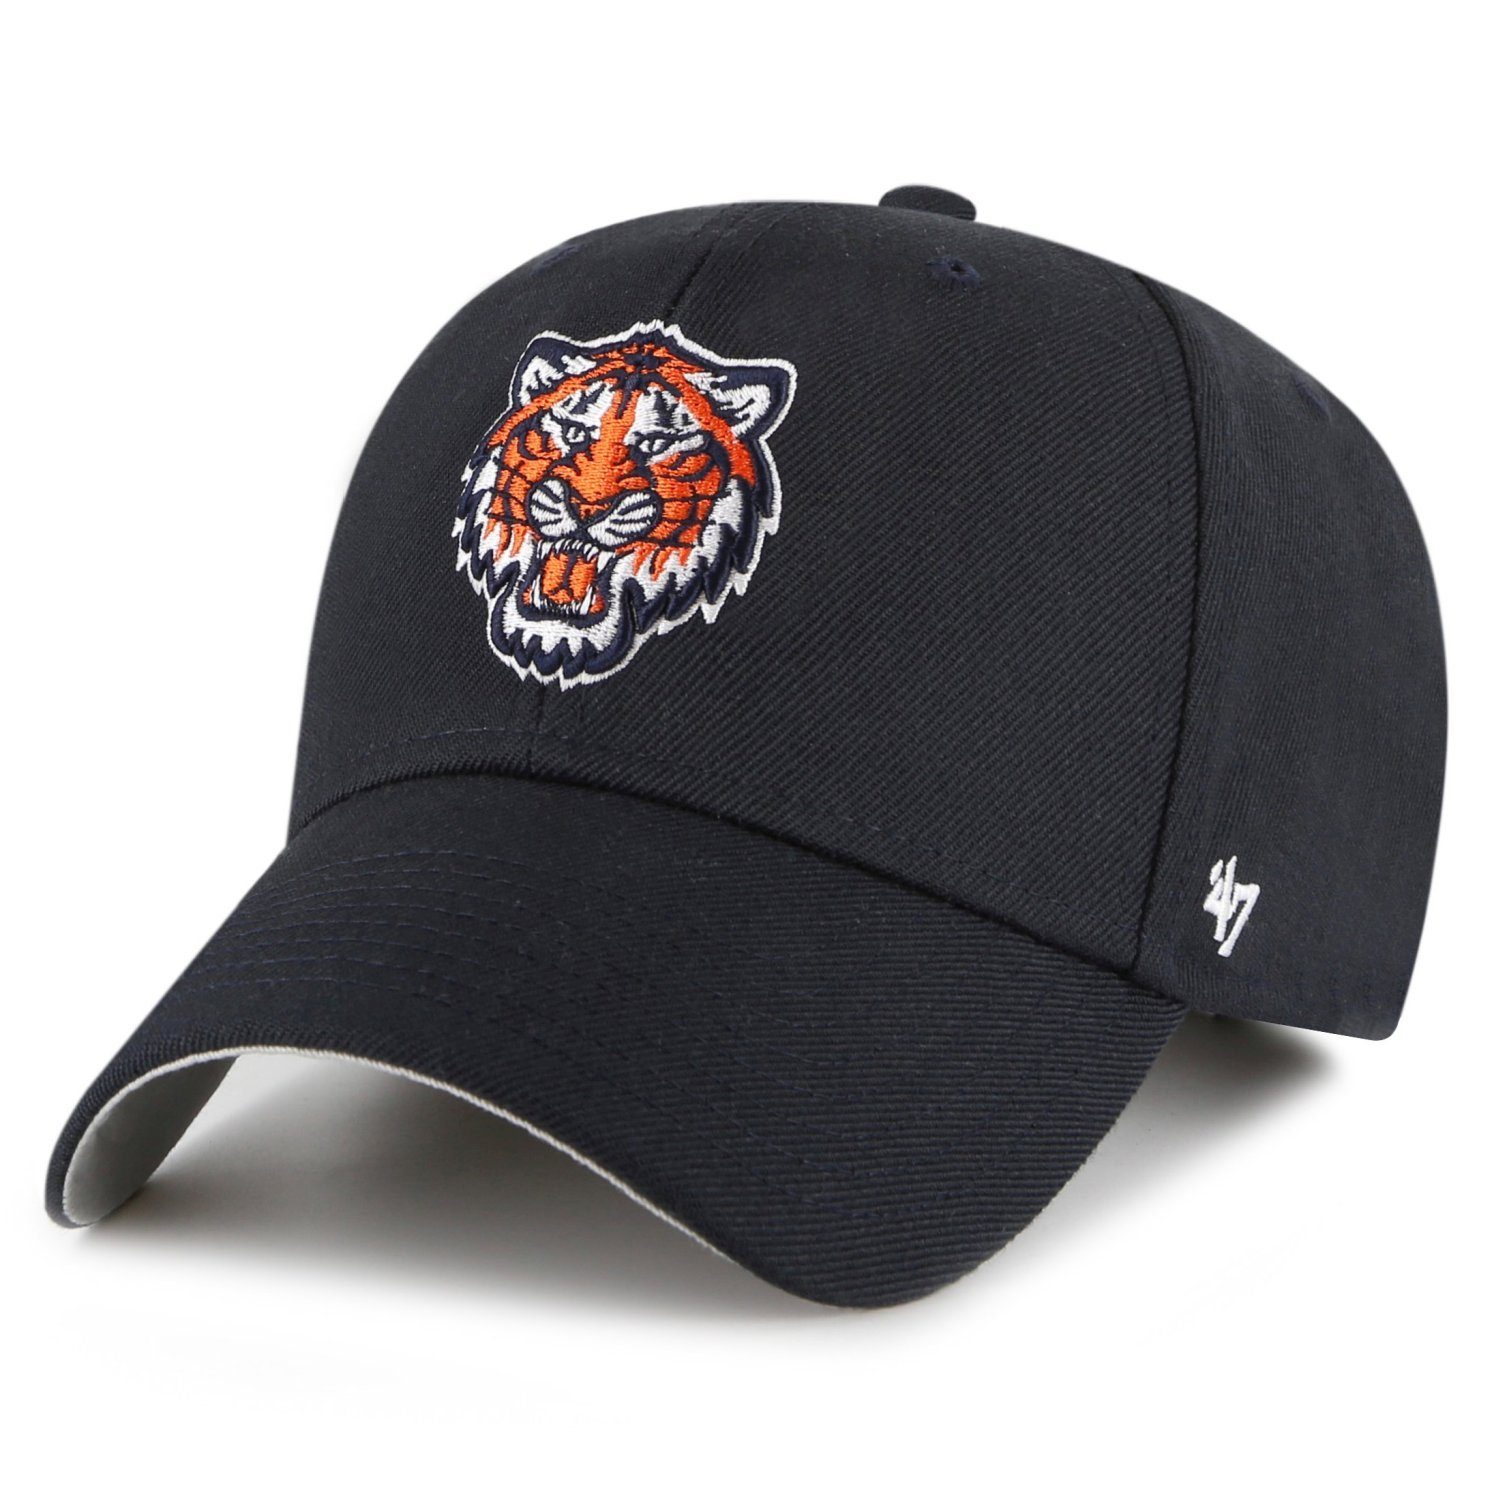 '47 Brand Trucker Cap Relaxed Fit MLB Detroit Tigers